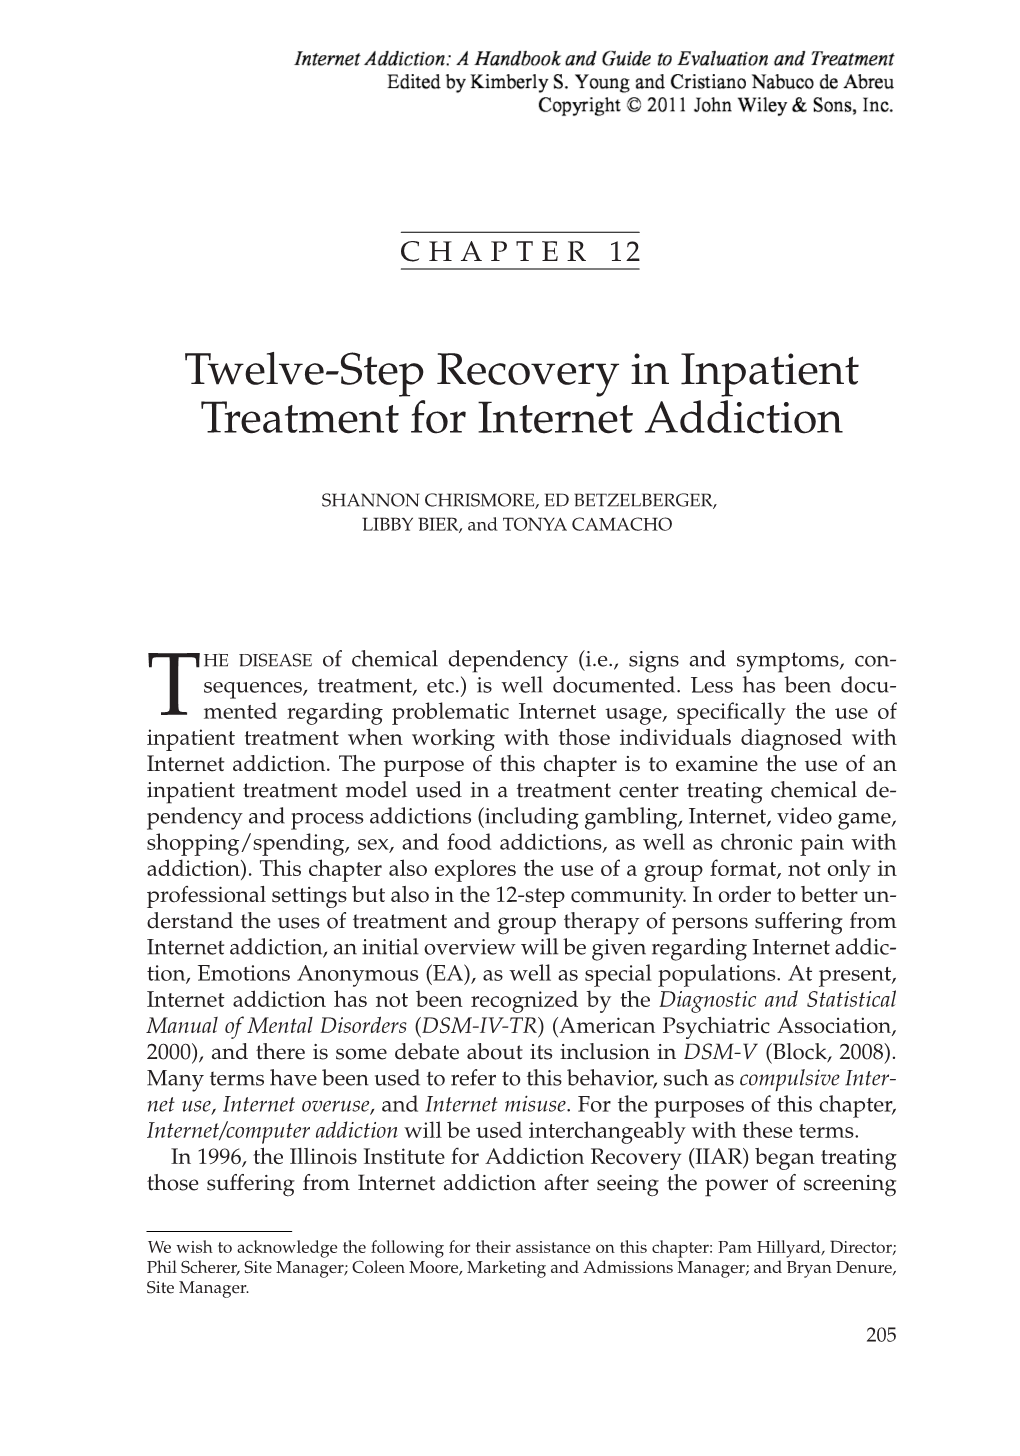 Twelve-Step Recovery in Inpatient Treatment for Internet Addiction